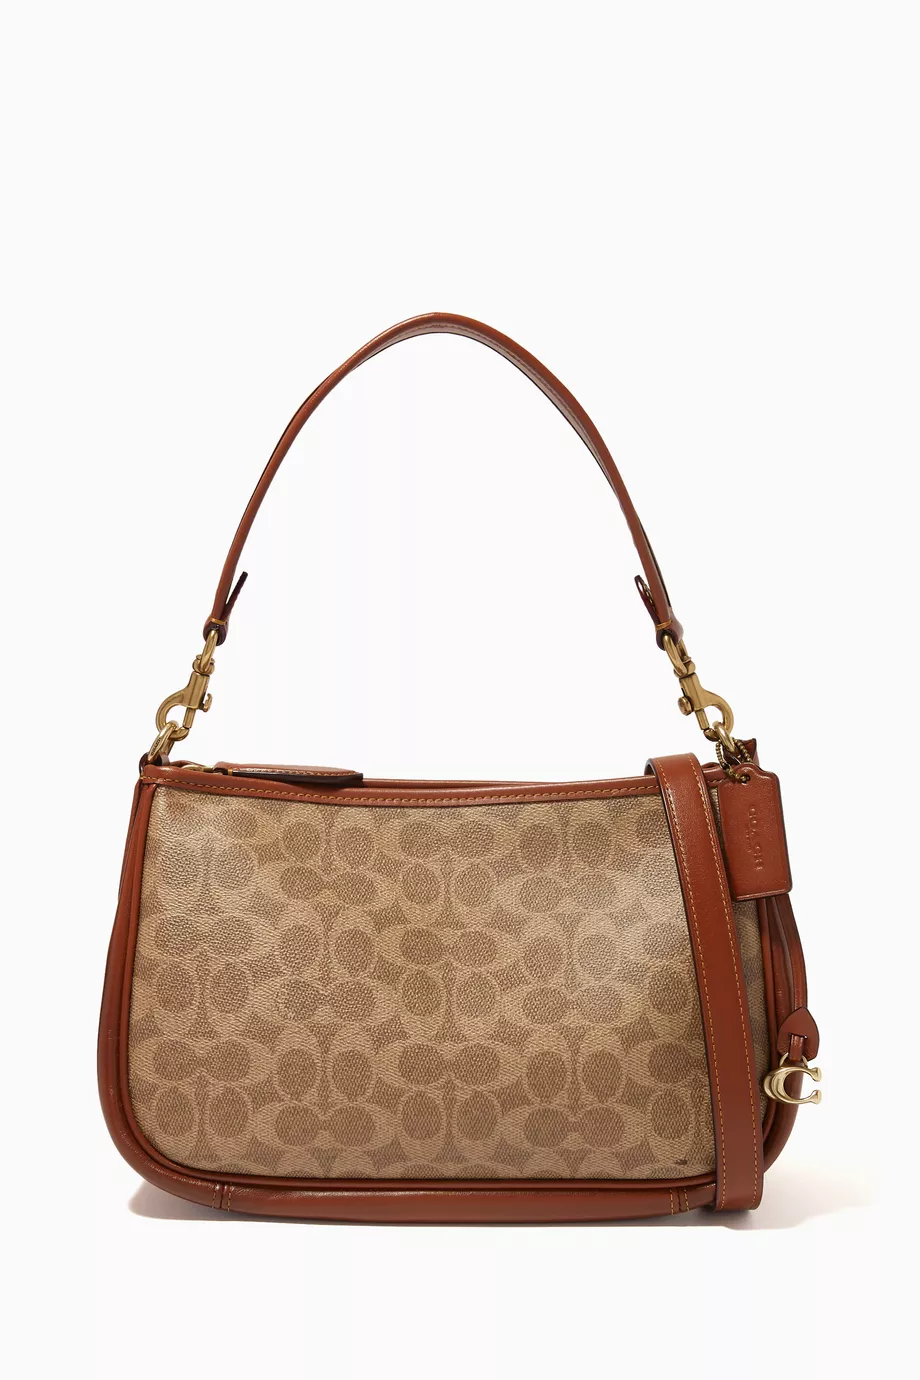 Coach Coated Canvas Signature Cary Crossbody, Tan Rust, One Size